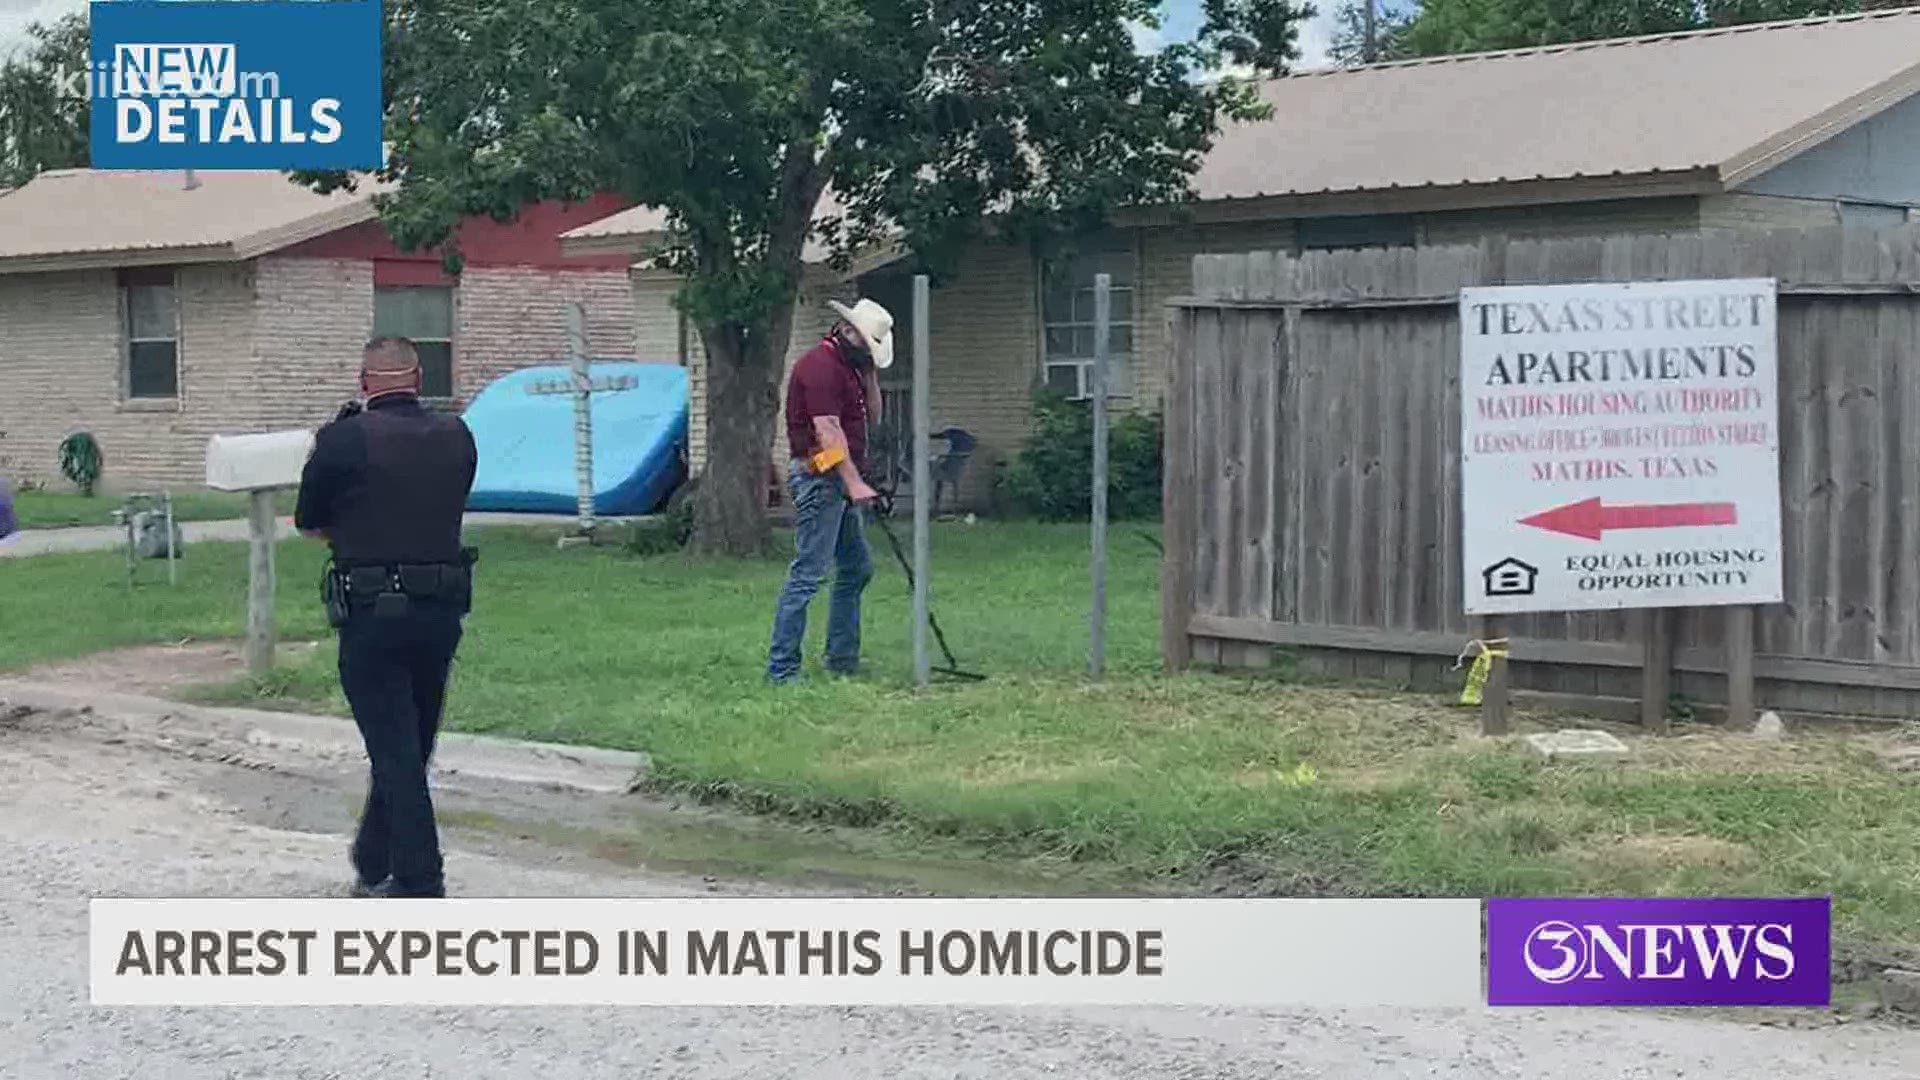 A Texas Ranger is helping with the investigation and U.S. Marshals are working on tracking down the suspect in that City’s first murder case of 2020.